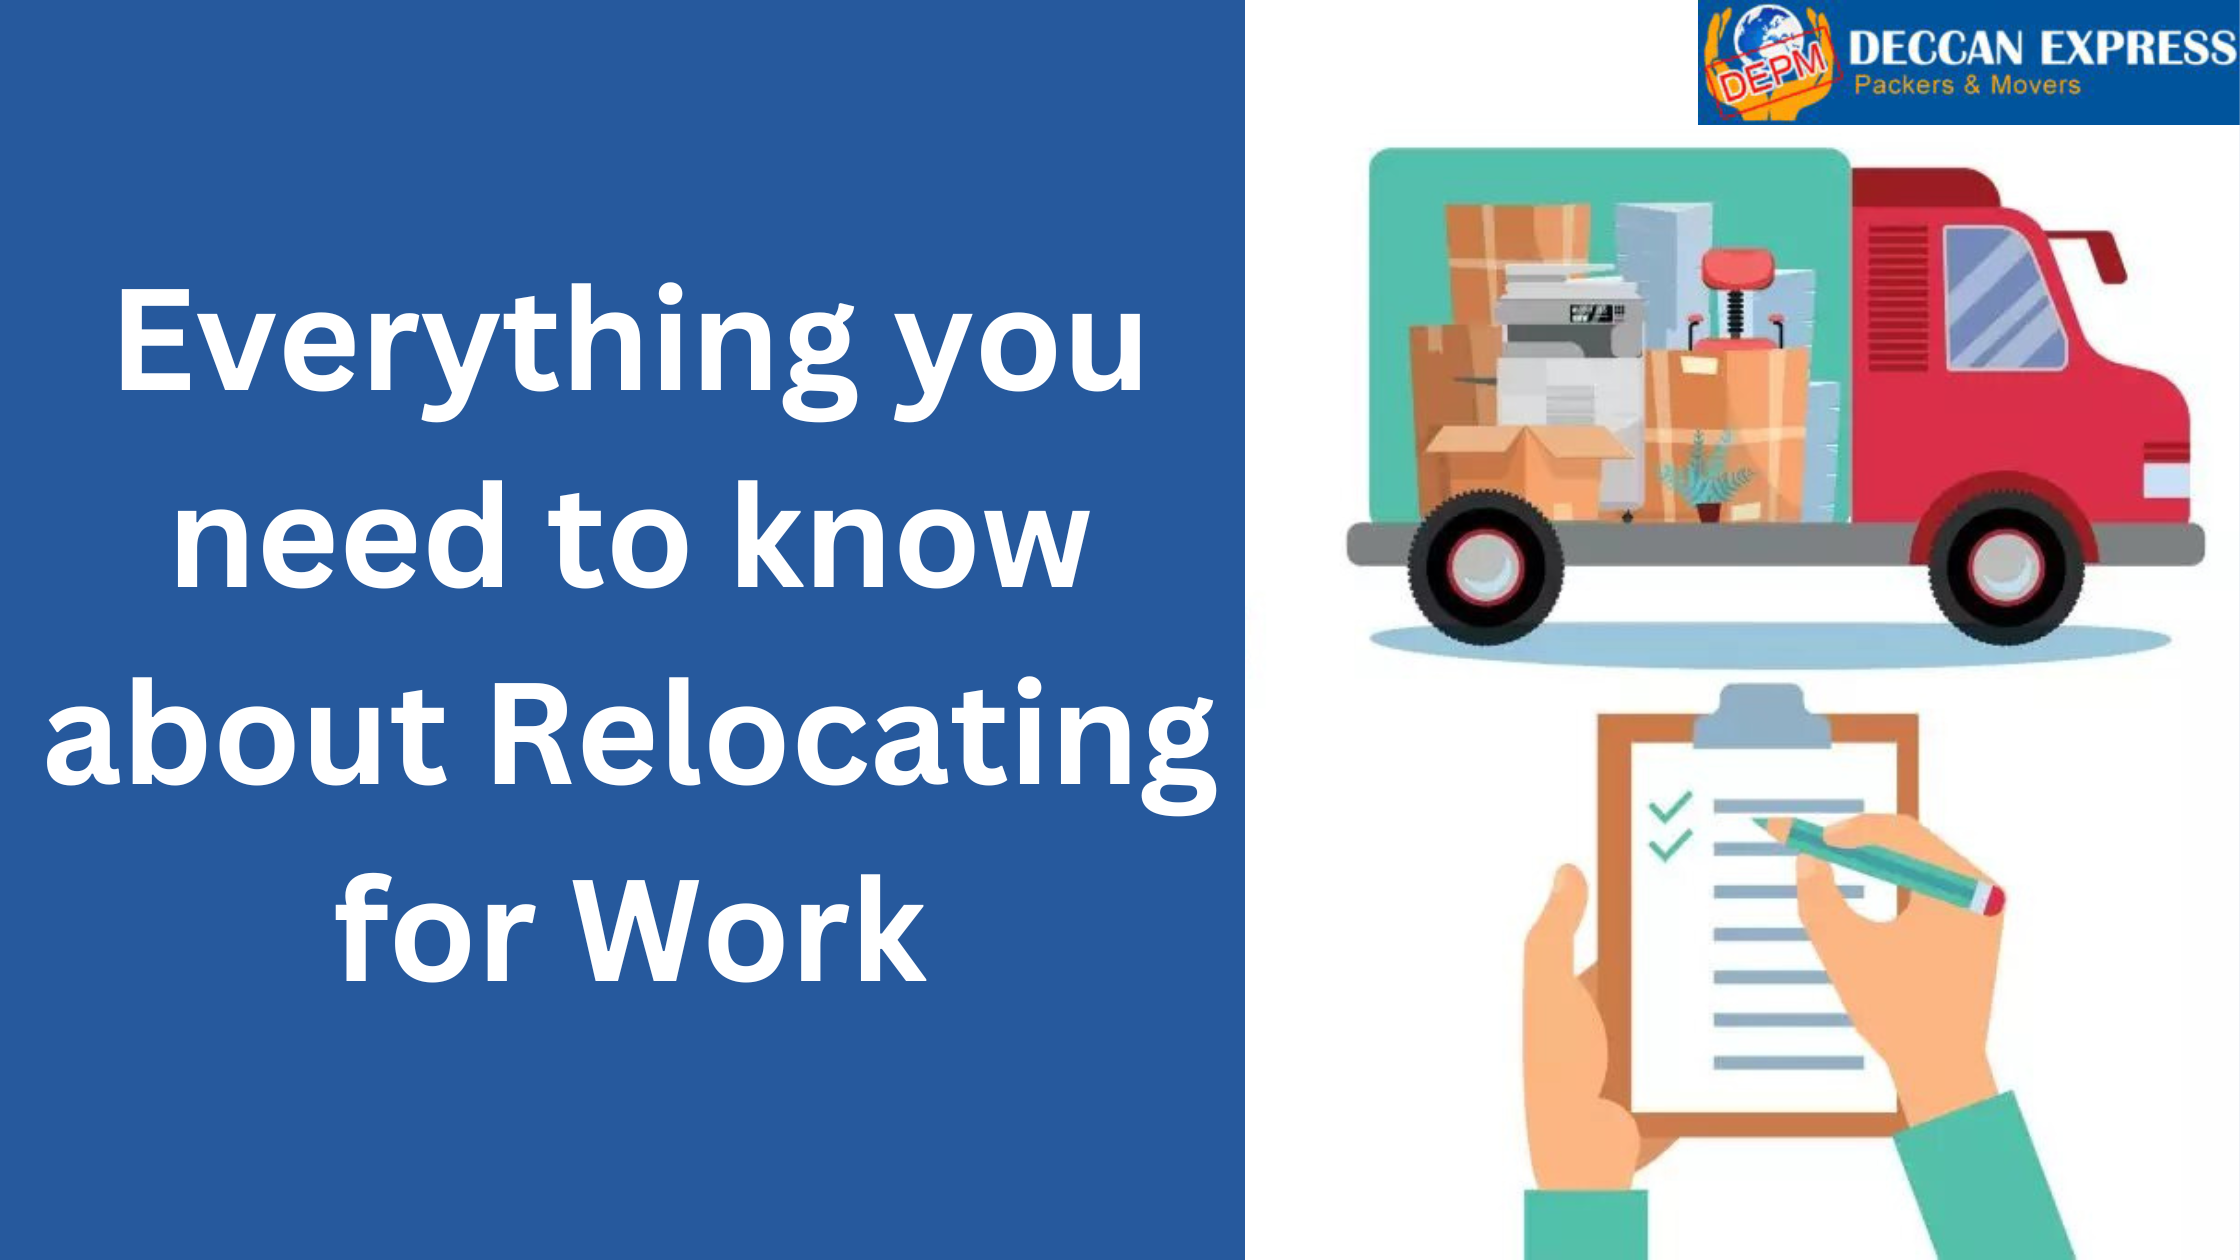 Everything you need to know about Relocating for Work